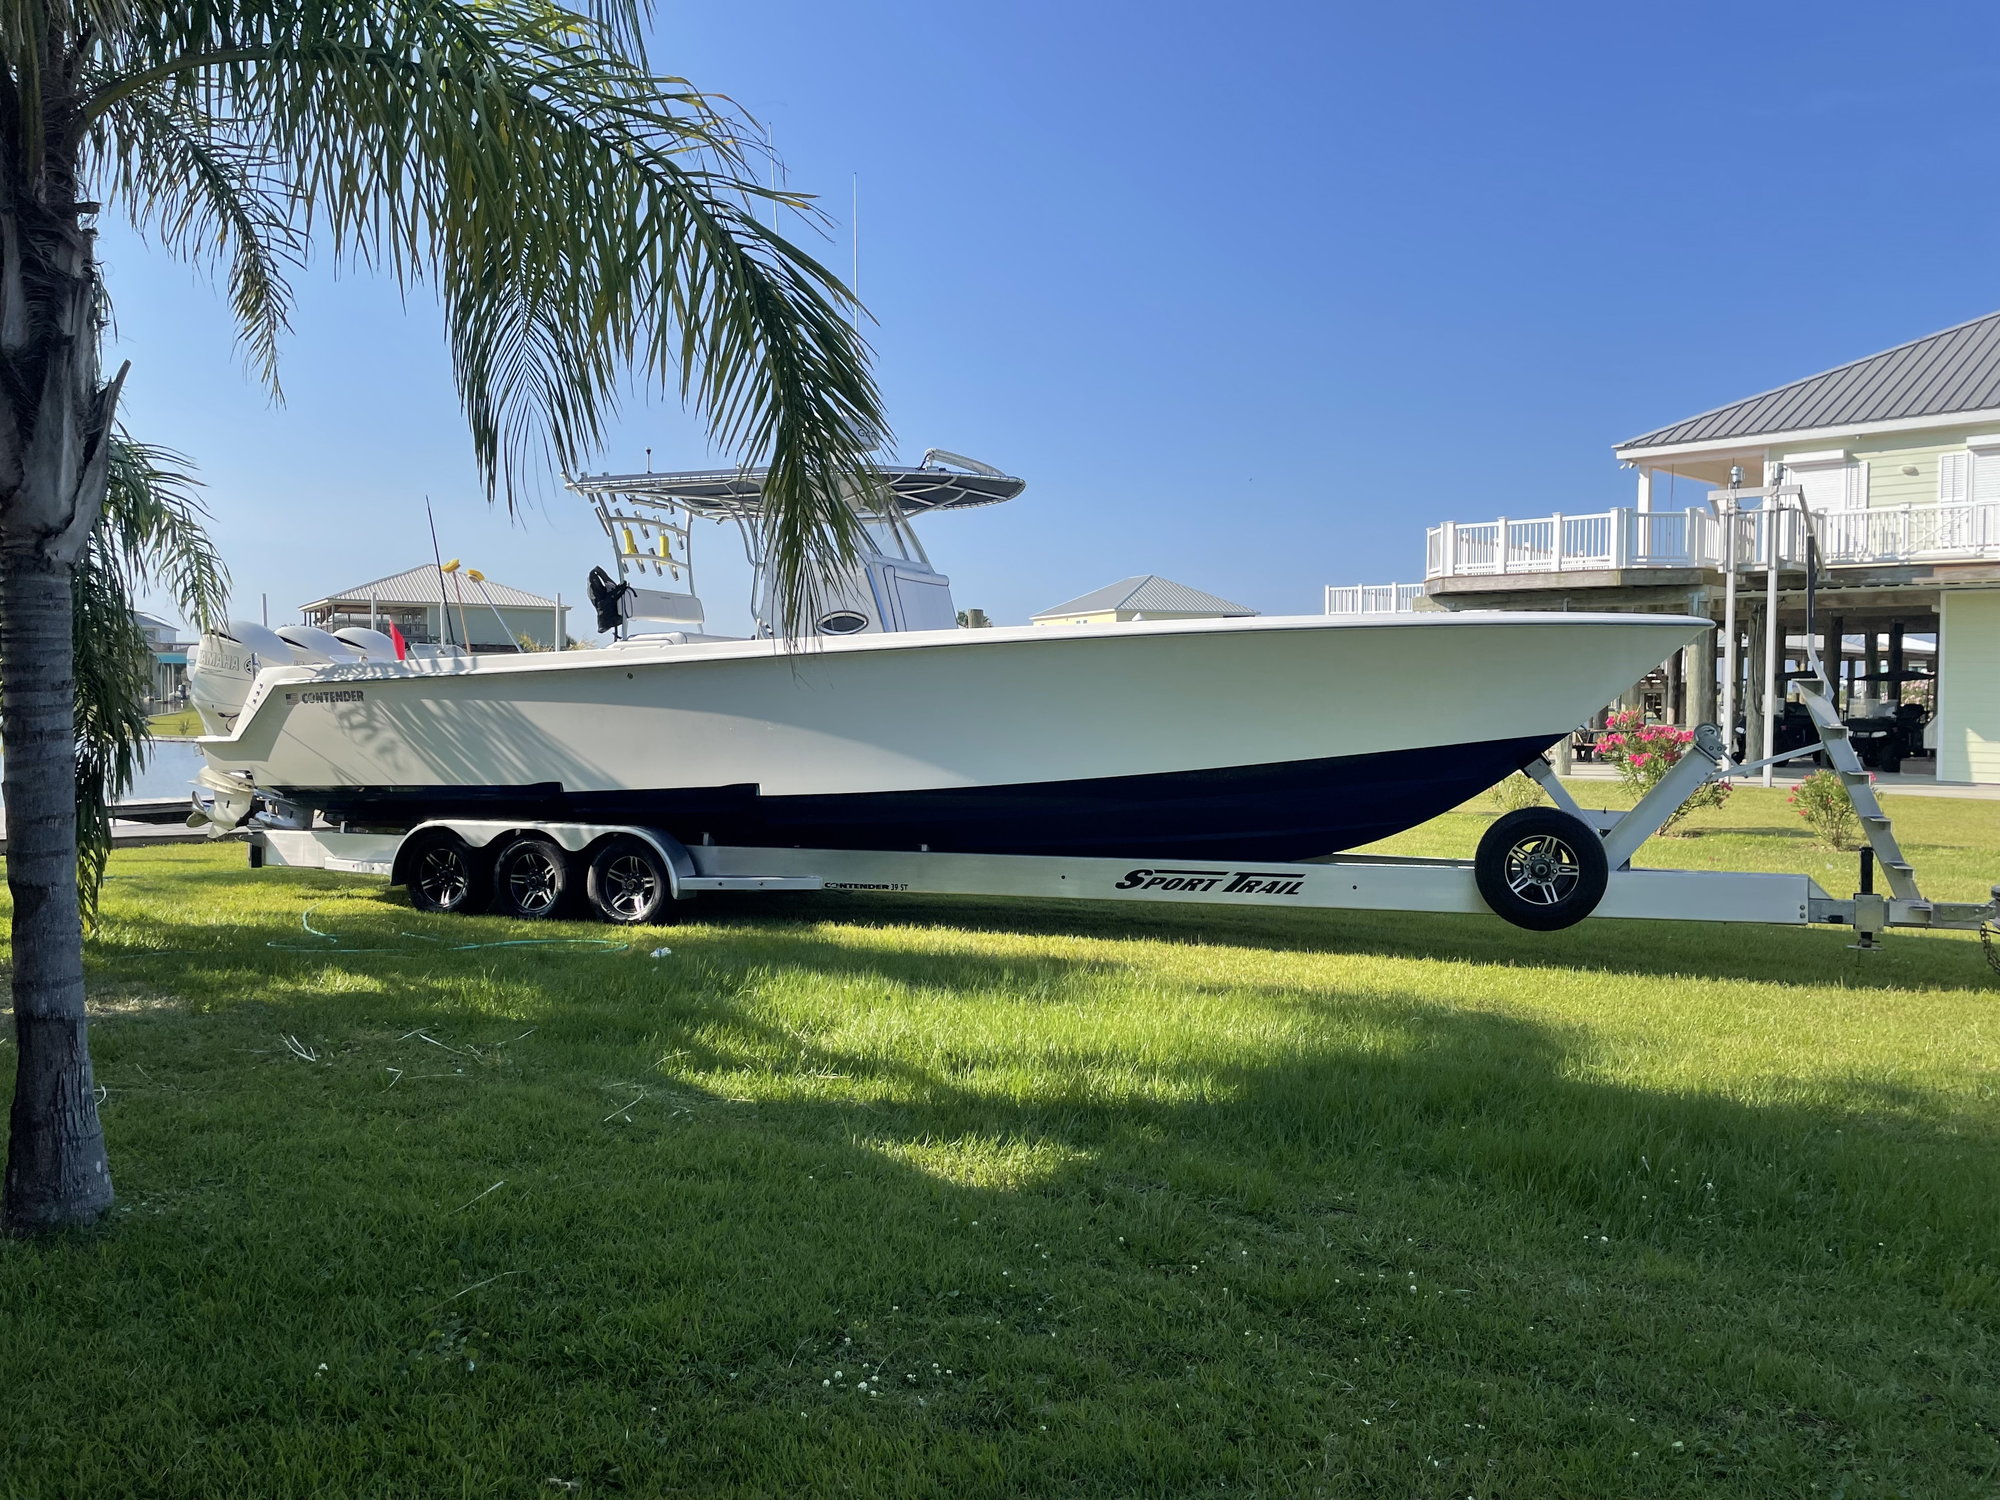 Stretch 25, 30, Mojos - The Hull Truth - Boating and Fishing Forum